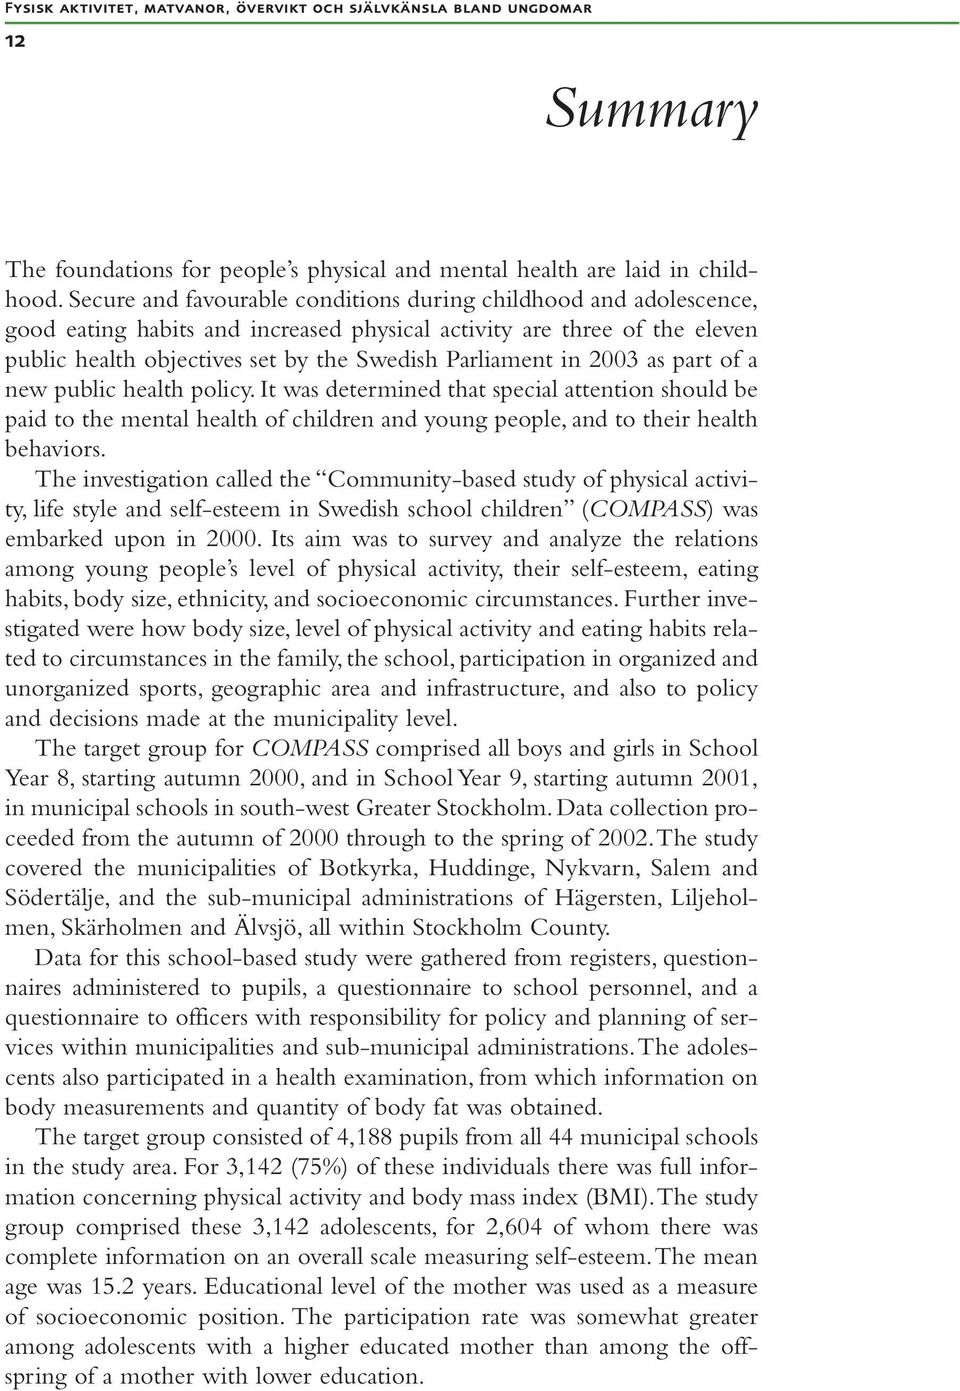 2003 as part of a new public health policy. It was determined that special attention should be paid to the mental health of children and young people, and to their health behaviors.